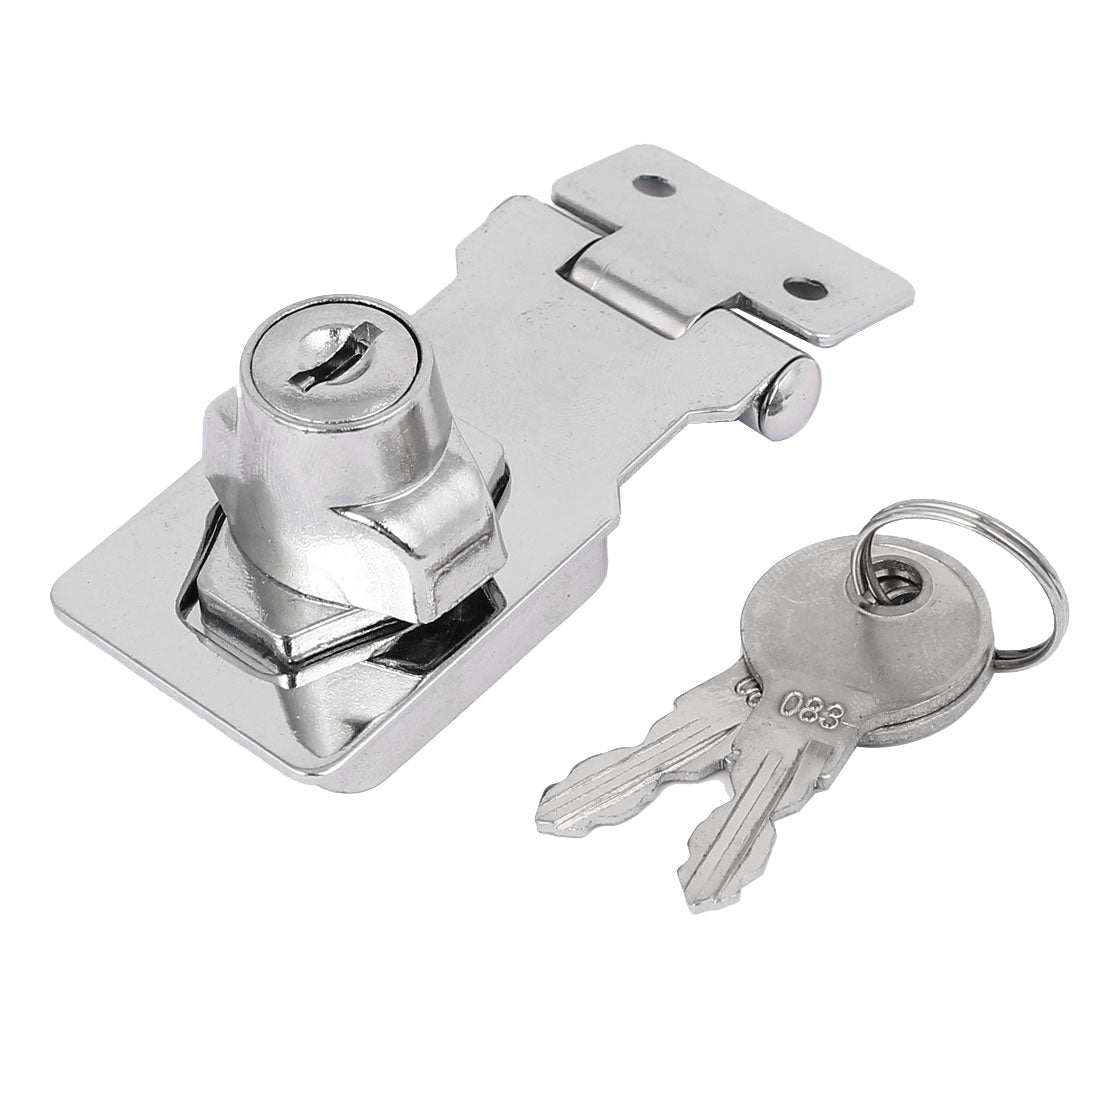 uxcell Uxcell Drawer Case Box Metal Keyed Hasp Lock Latch Silver Tone 64mm Length